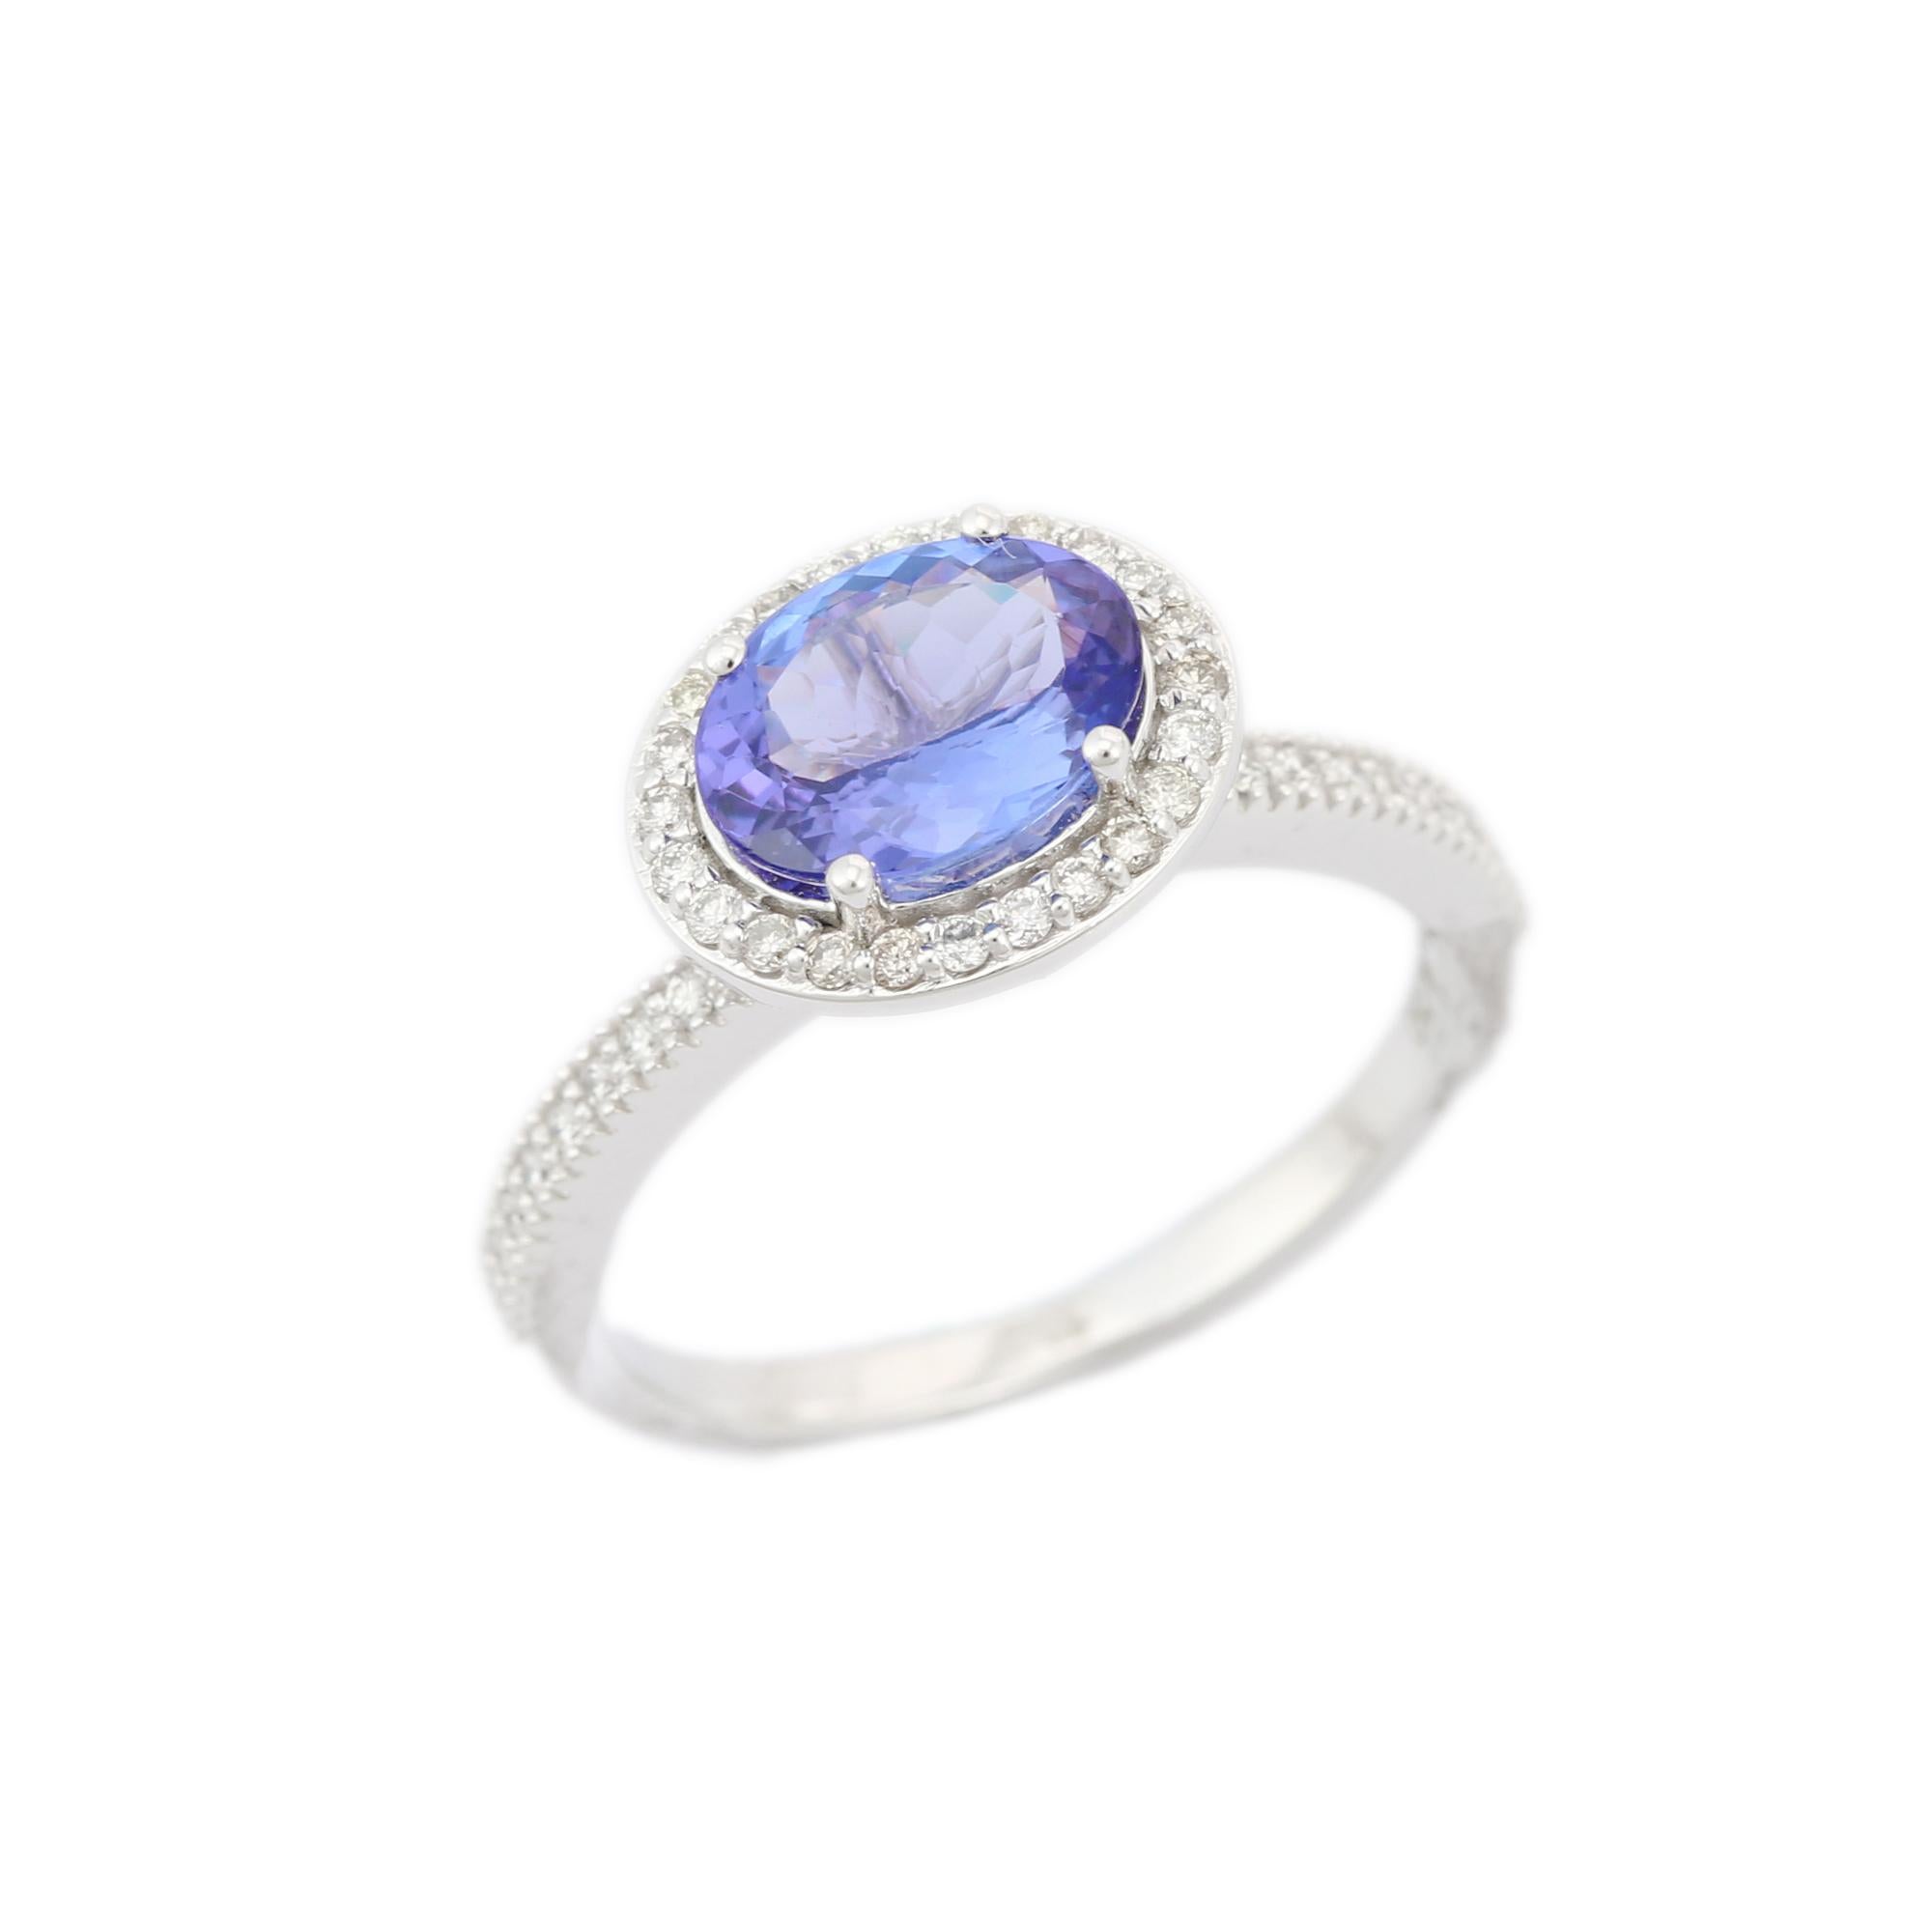 For Sale:  Oval Shaped Tanzanite and Diamond Ring in 18K White Gold 7